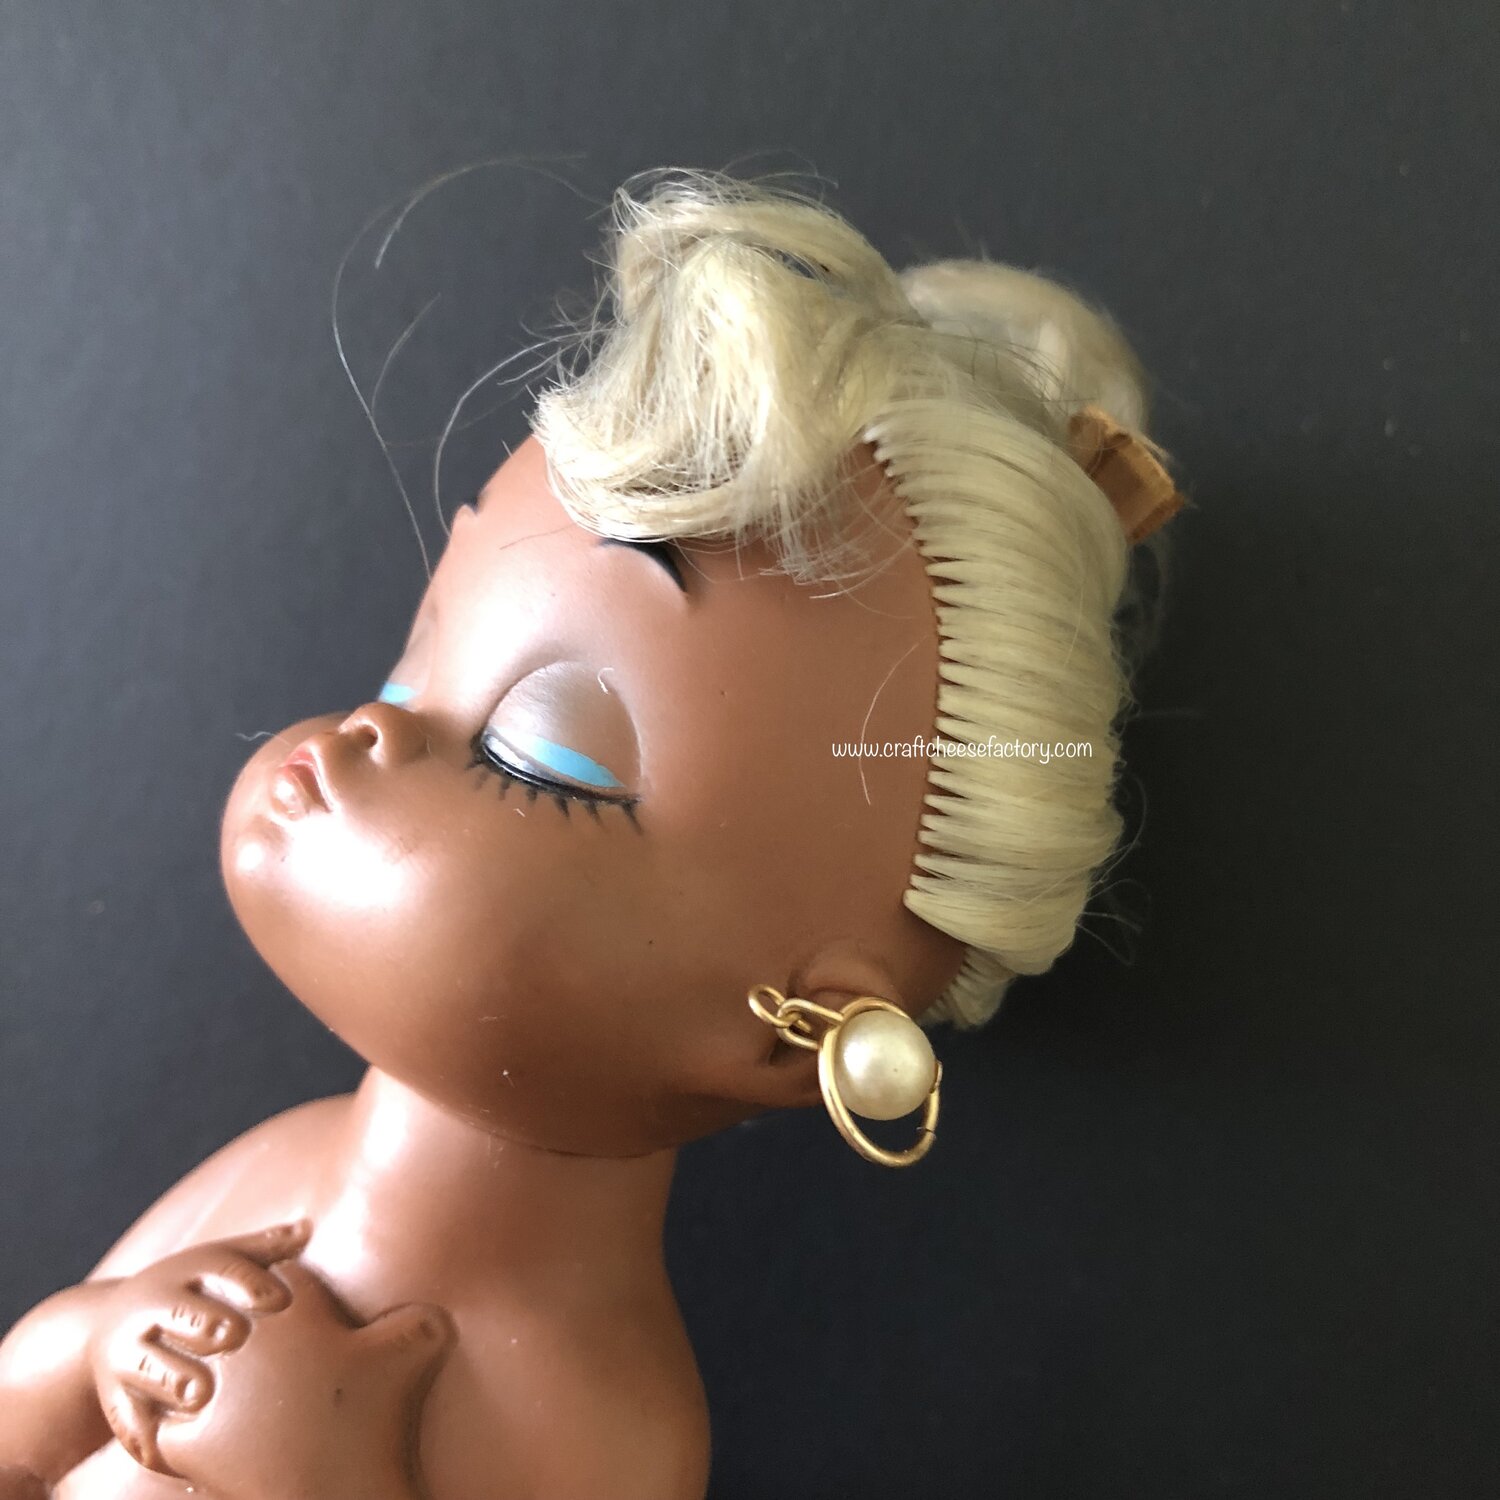 Vintage Doll Porn - Vintage Japan 1970s 1980s Mod girl doll figurine with ponytail, clasped  hands and pearl earrings â€” Craftcheesefactory.com